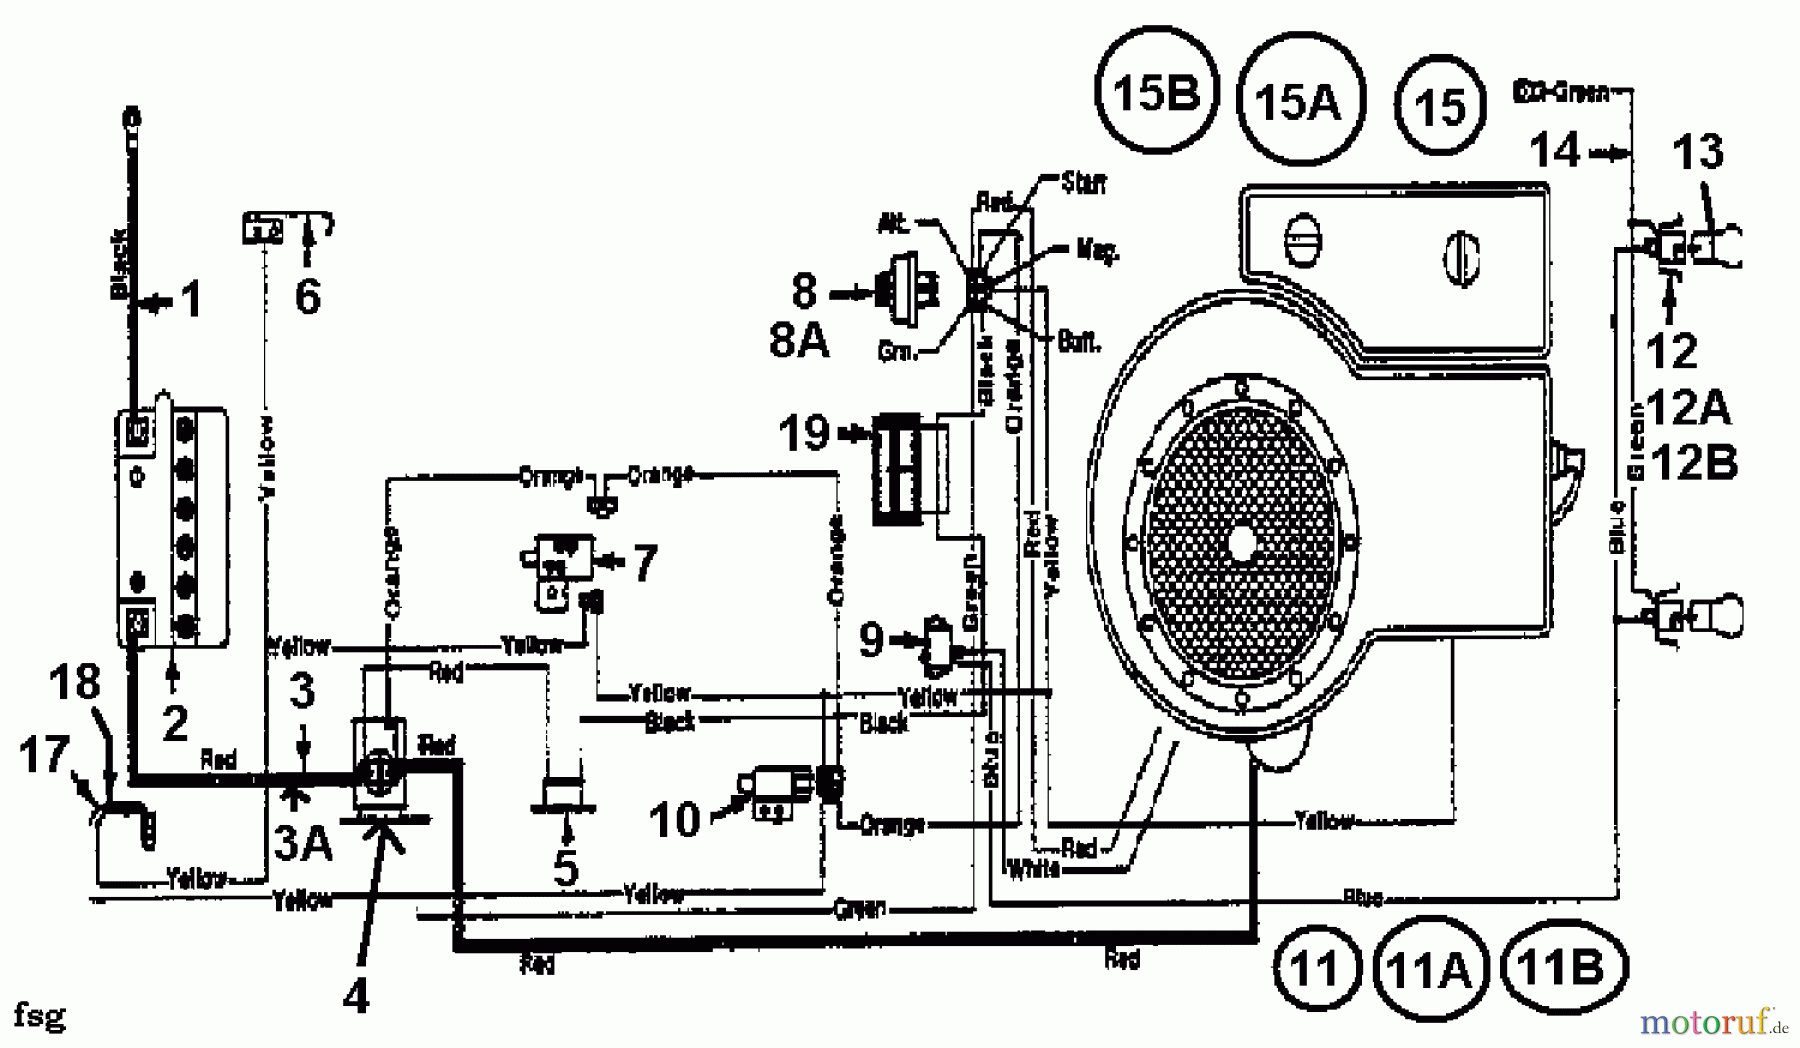  White Lawn tractors 12/91 133I451E679  (1993) Wiring diagram single cylinder